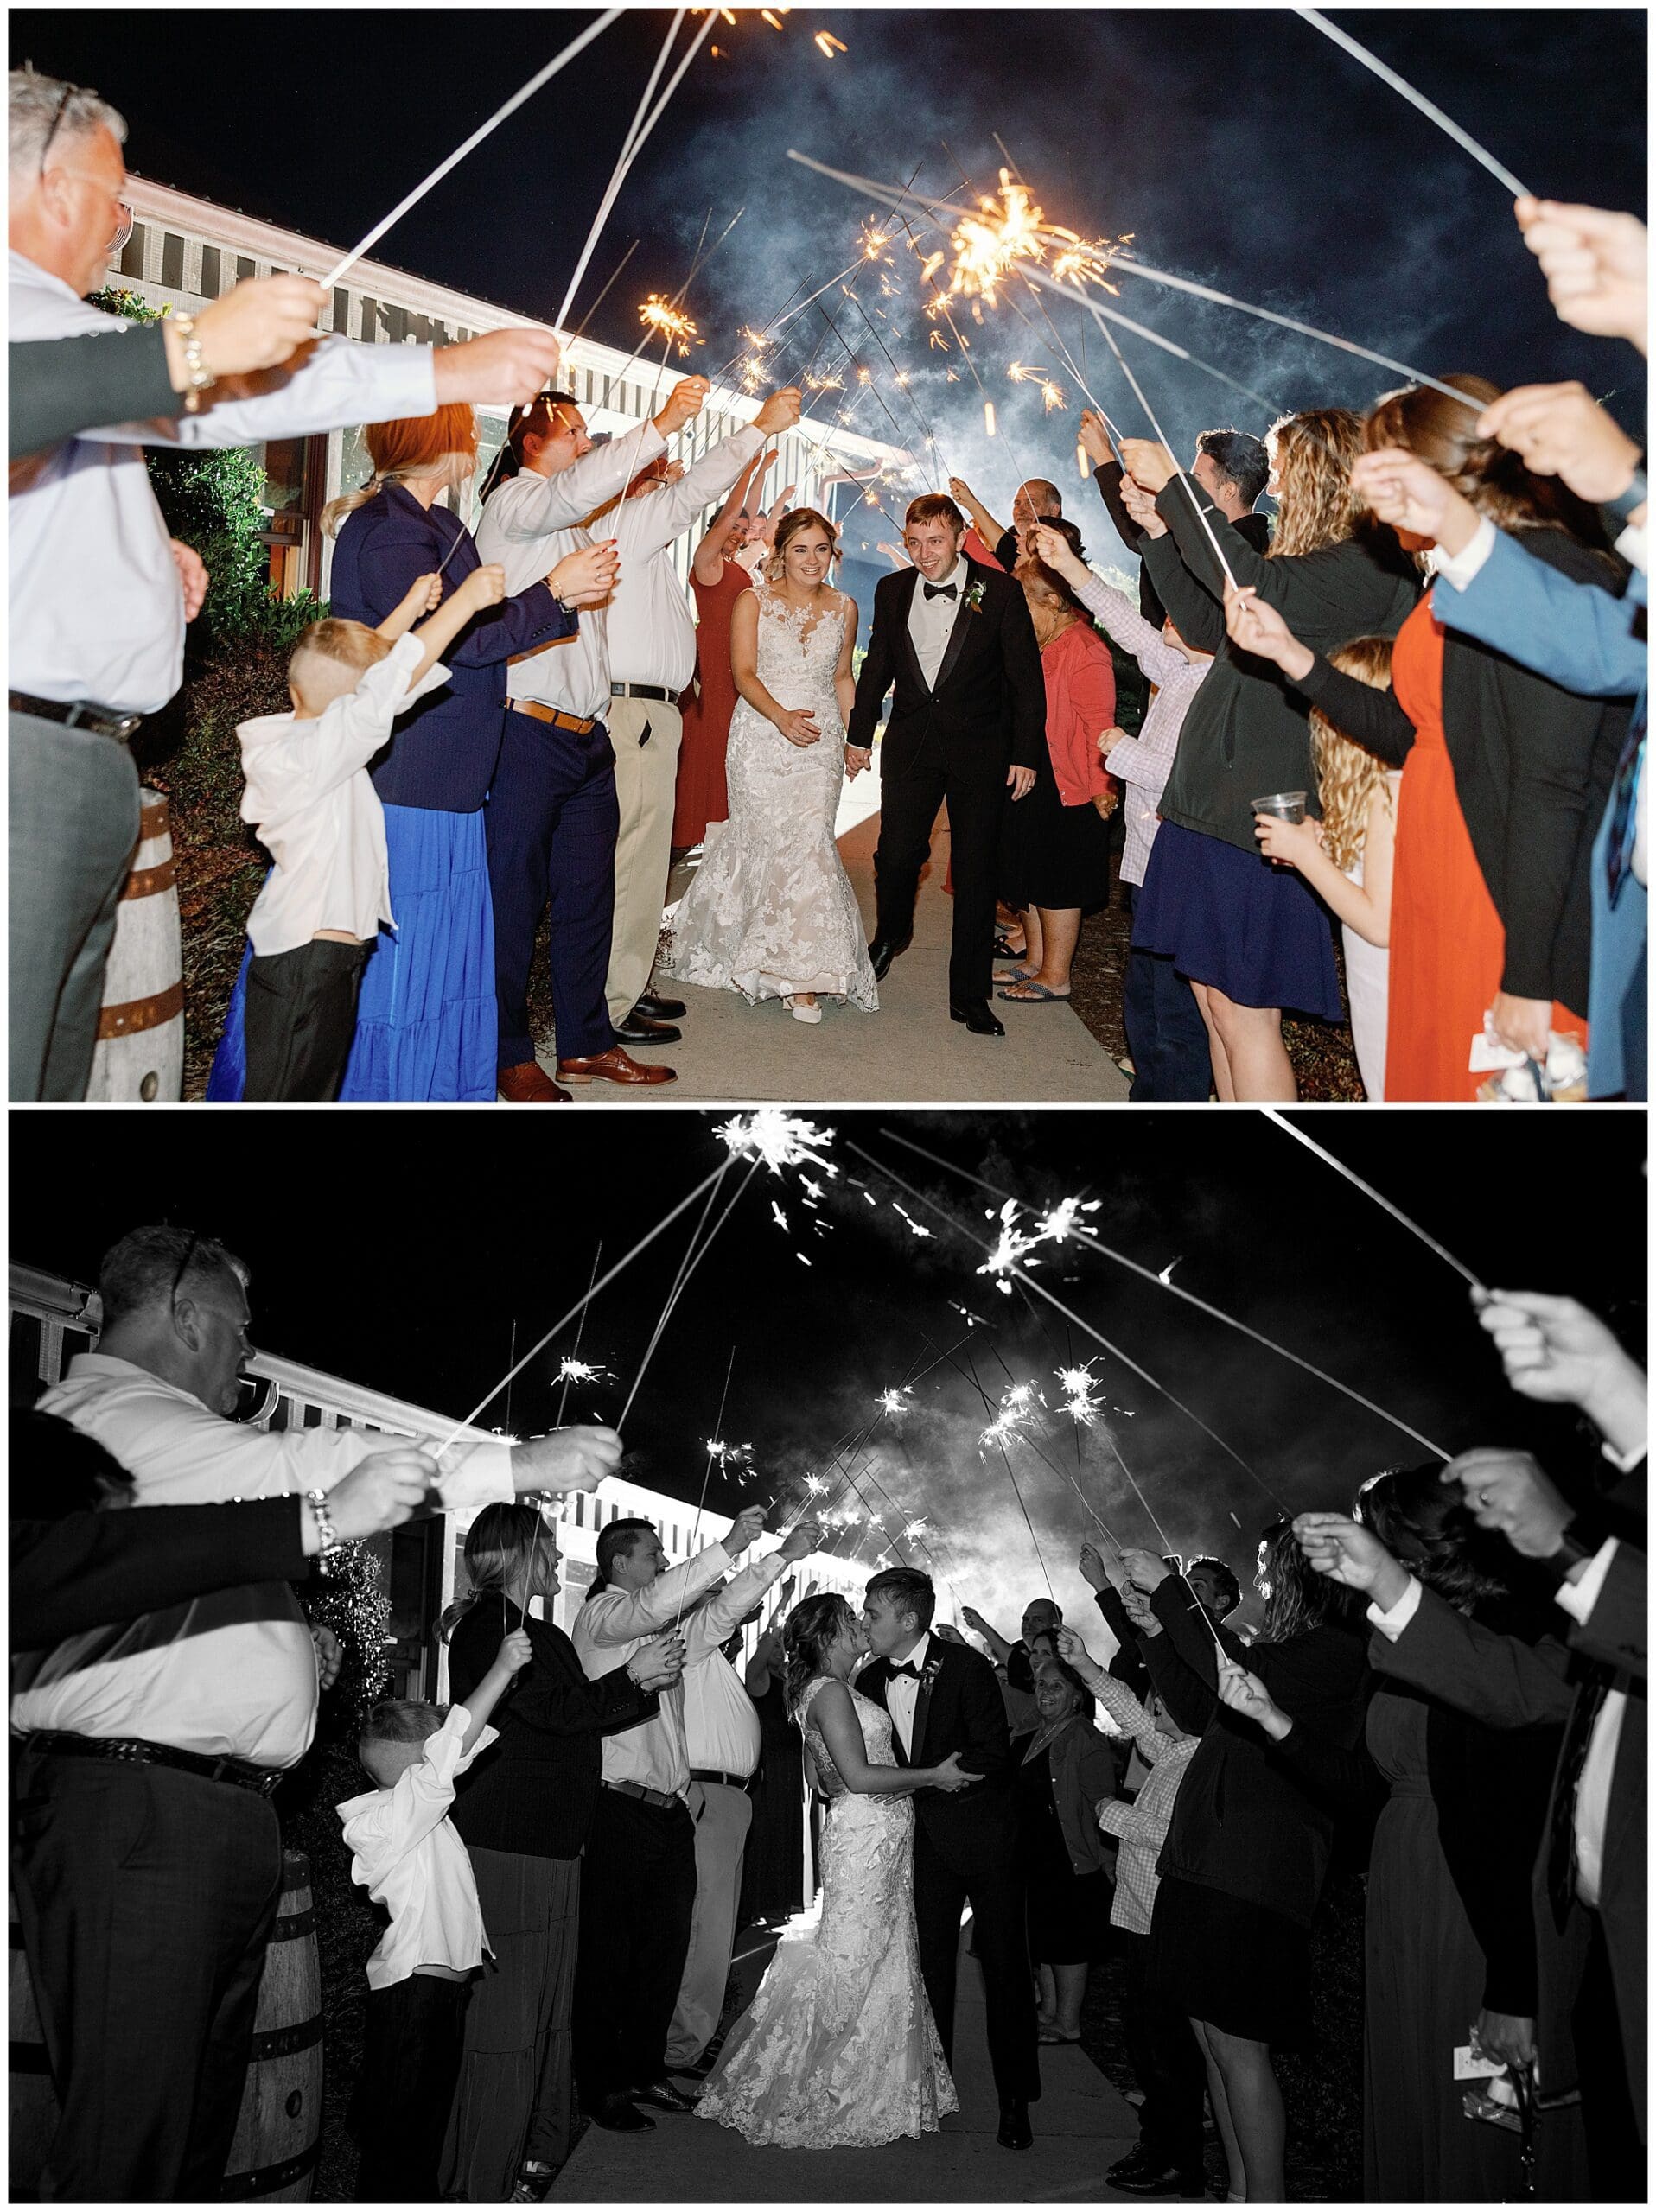 A bride and groom walk under an arch of sparklers held by guests, presented in both color and black-and-white versions.